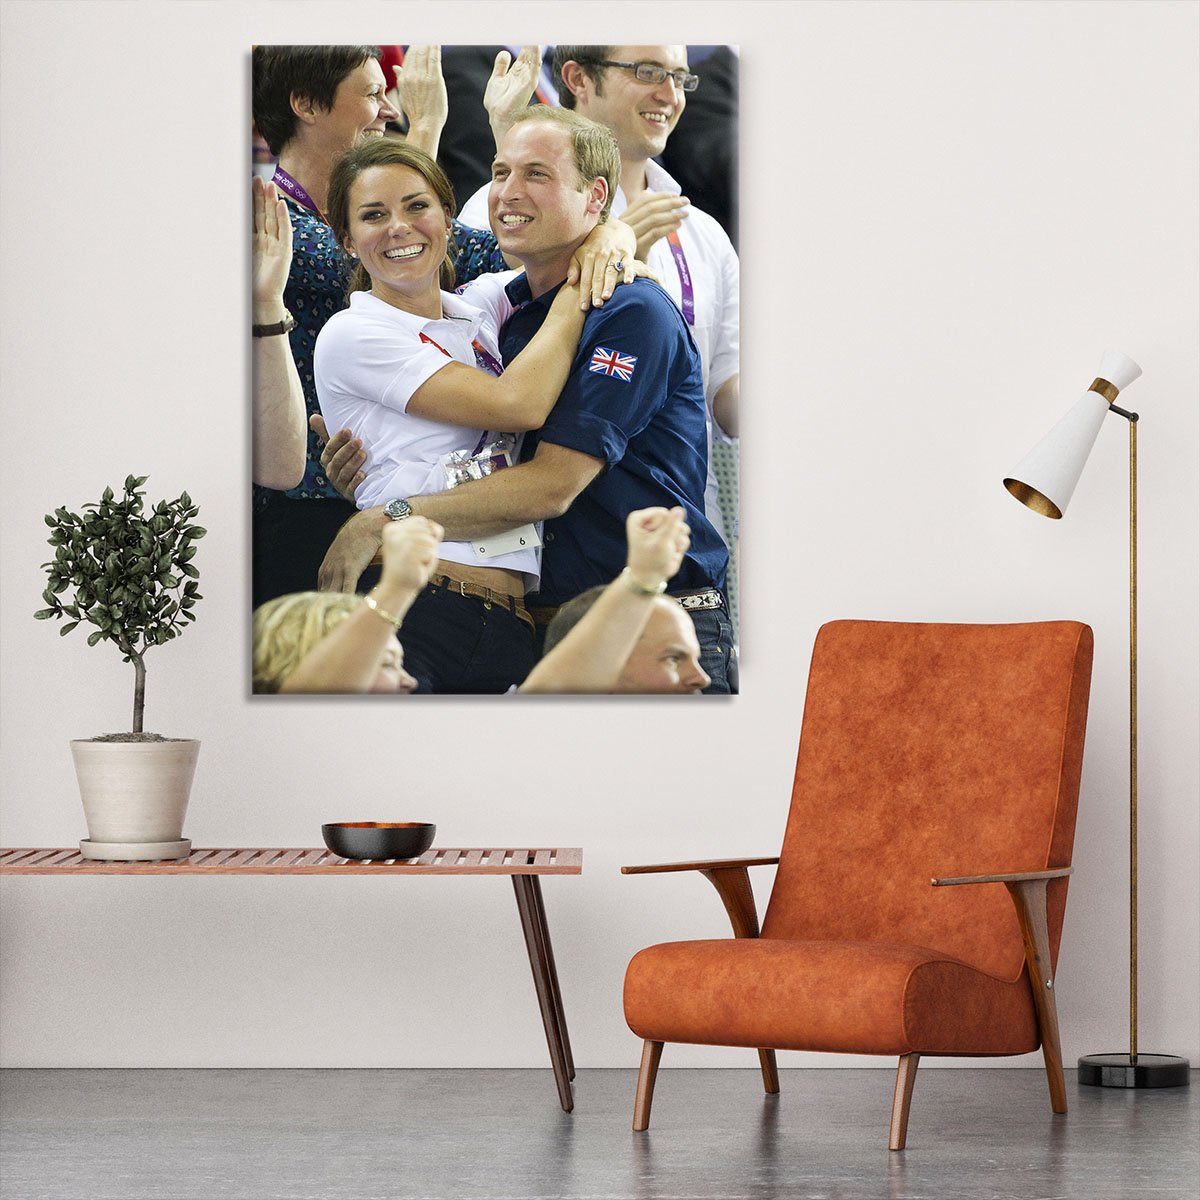 Prince William and Kate hugging at the 2012 Olympics Canvas Print or Poster